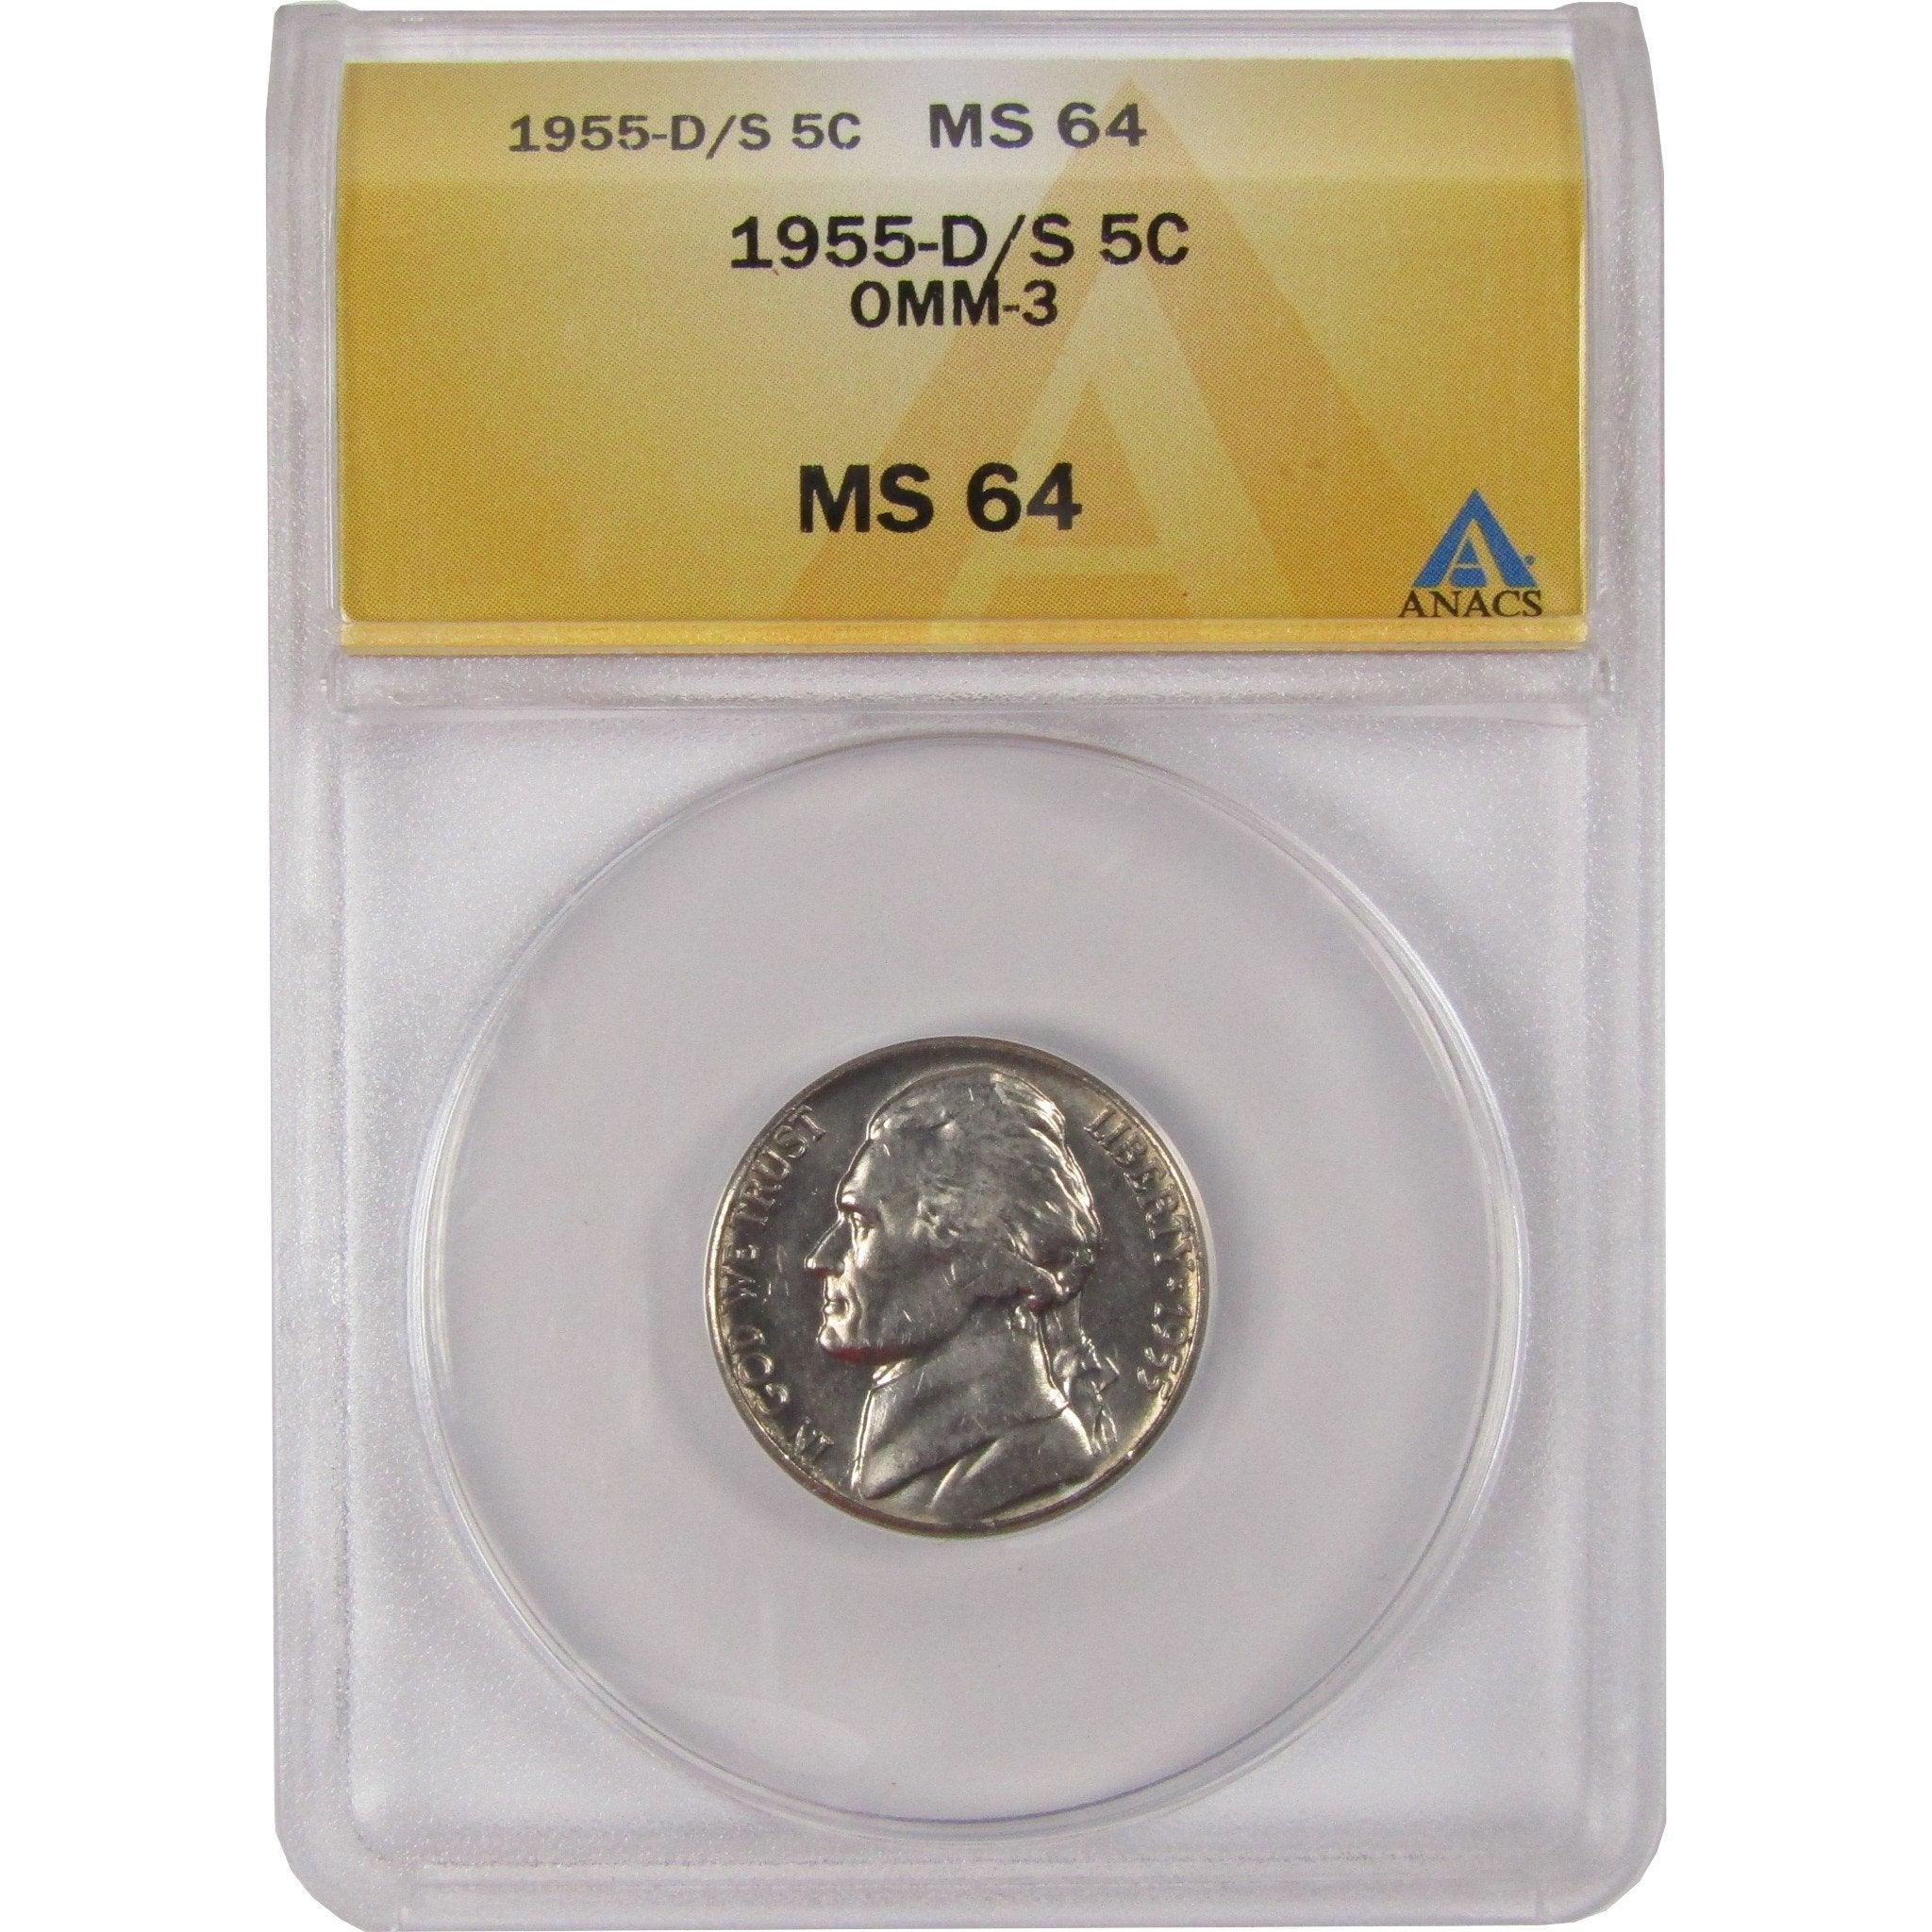 1955 D/S OMM-3 Jefferson Nickel MS 64 ANACS Uncirculated SKU:CPC1149